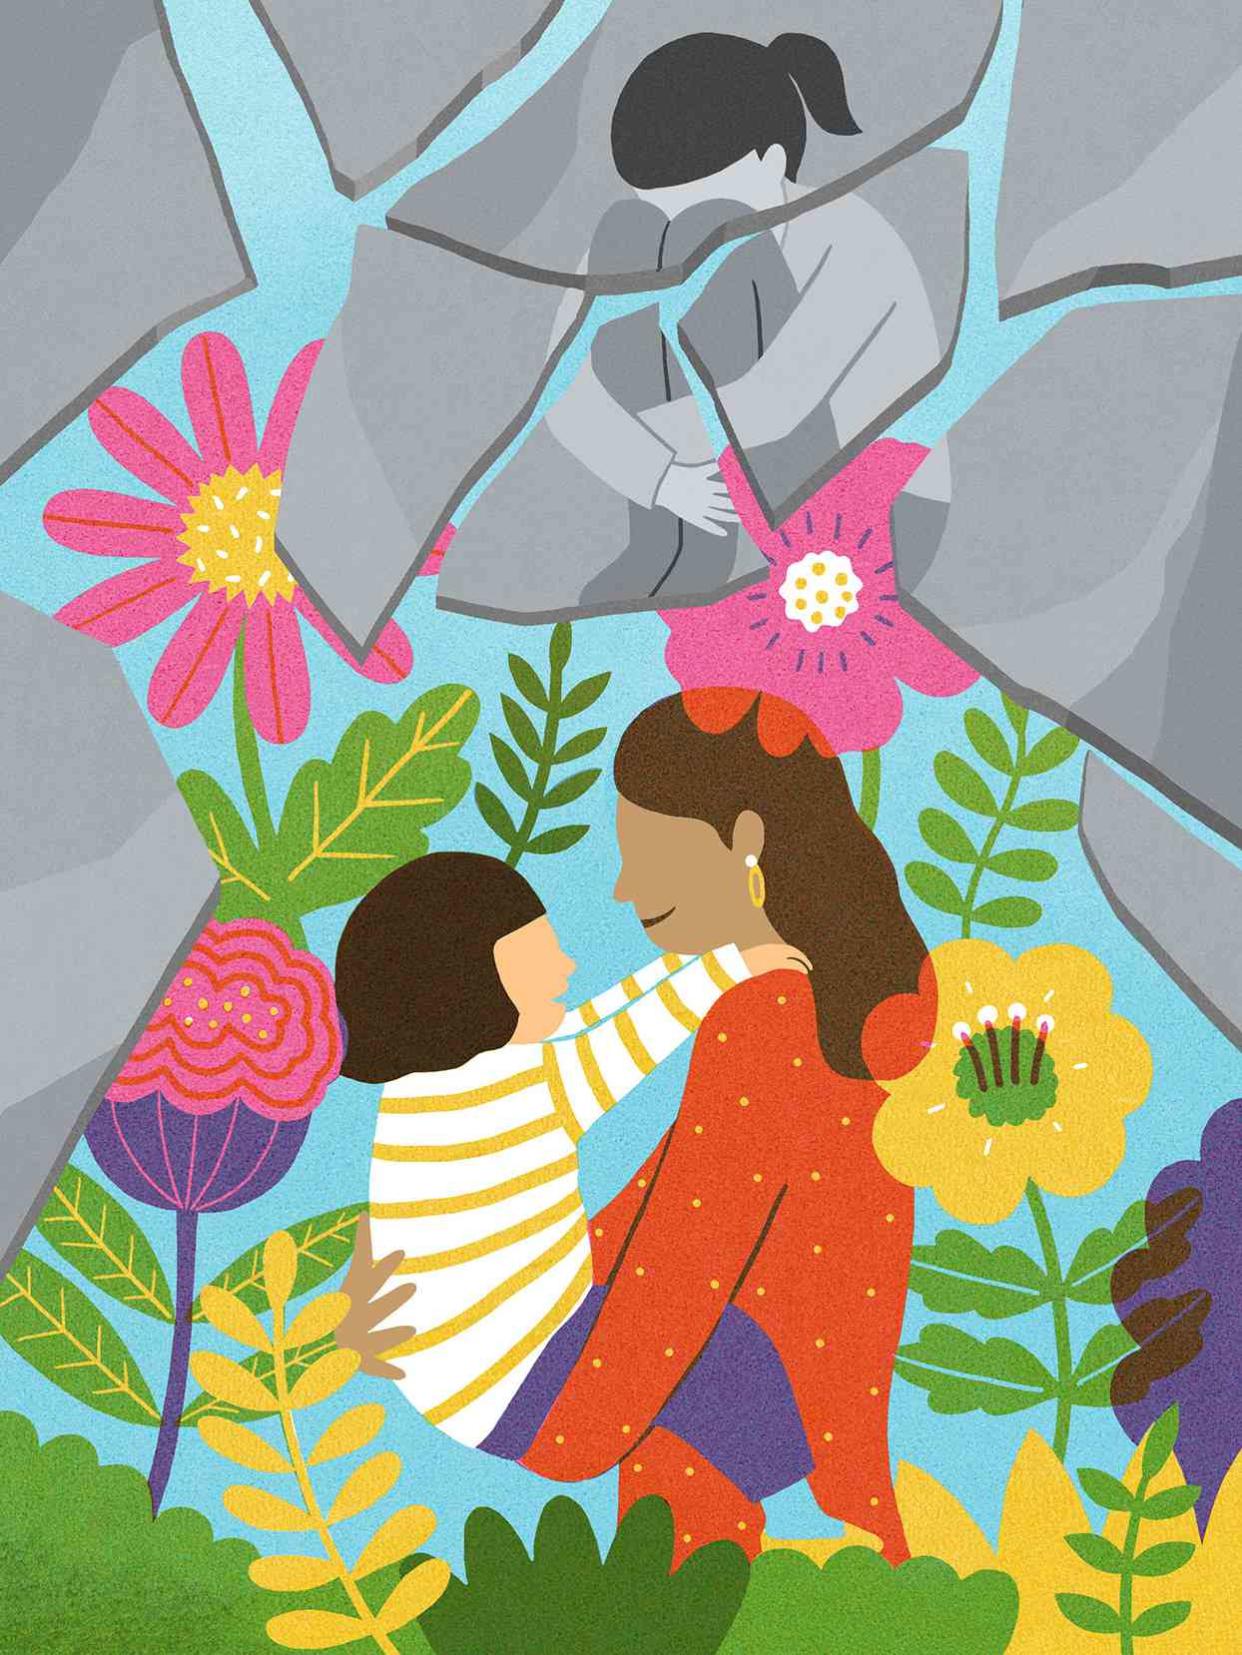 colorful collage illustration of mother holding daughter, floral elements, and grayscale broken family representation